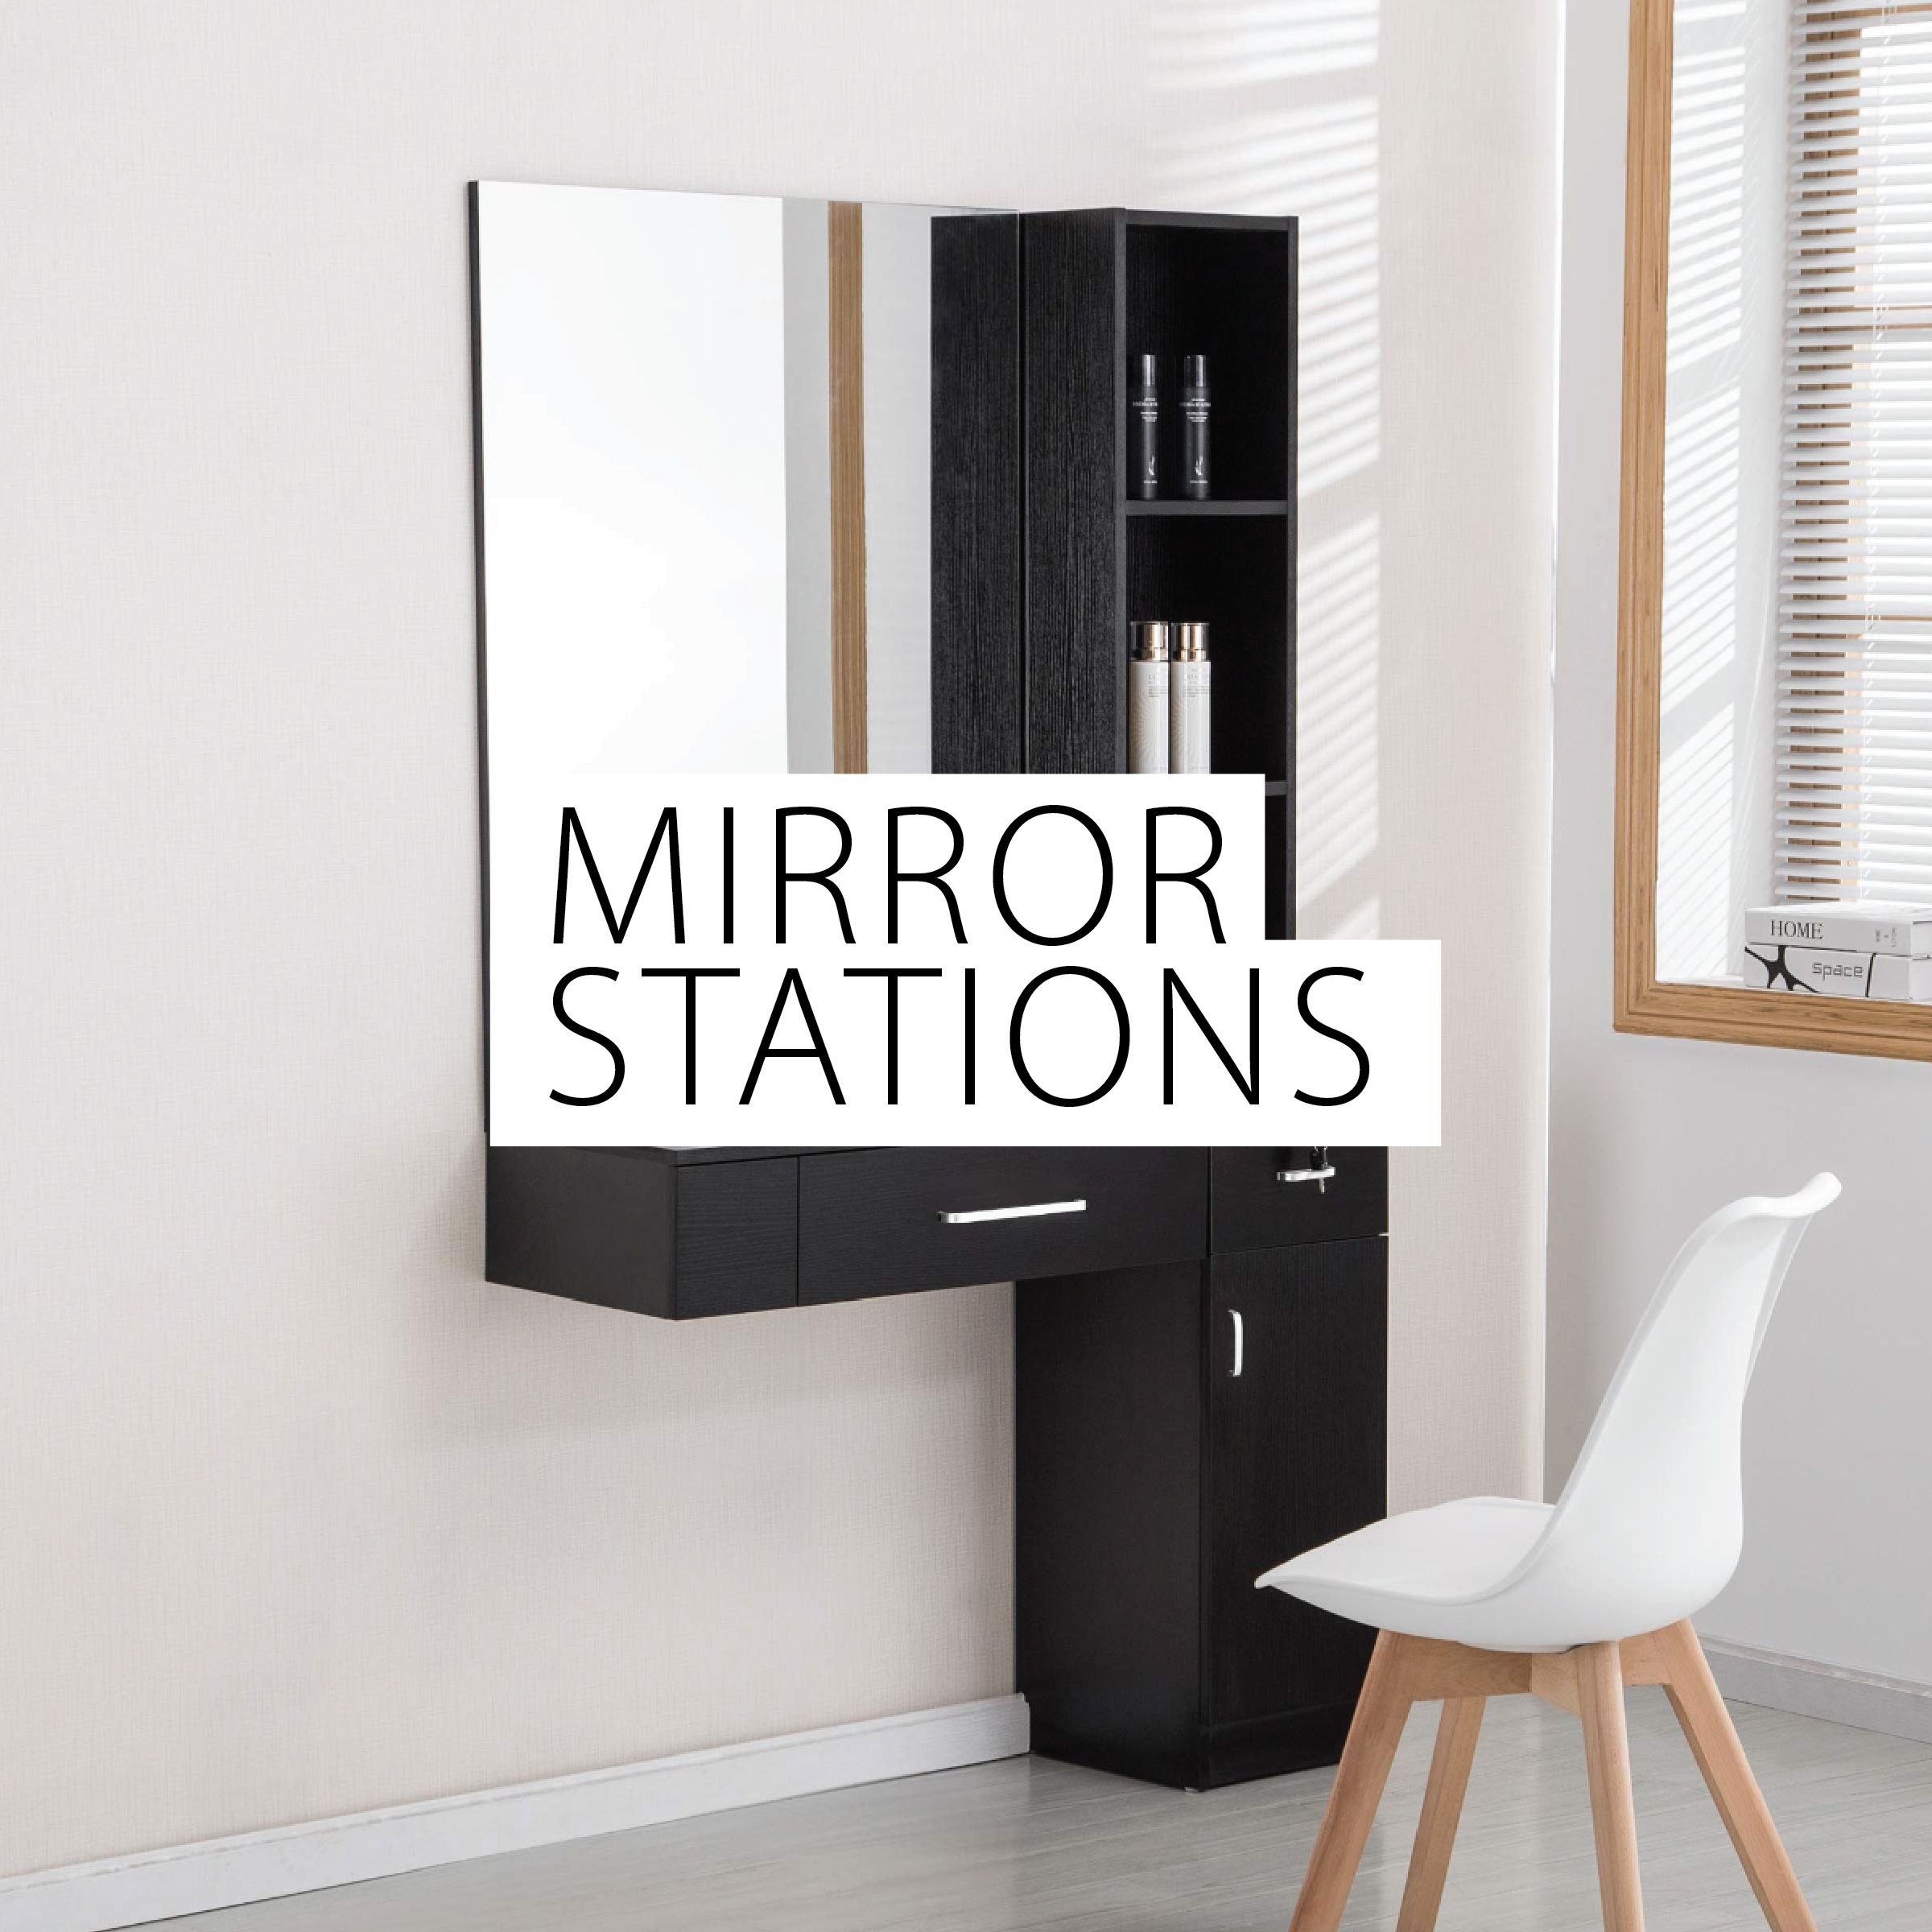 mirror stations